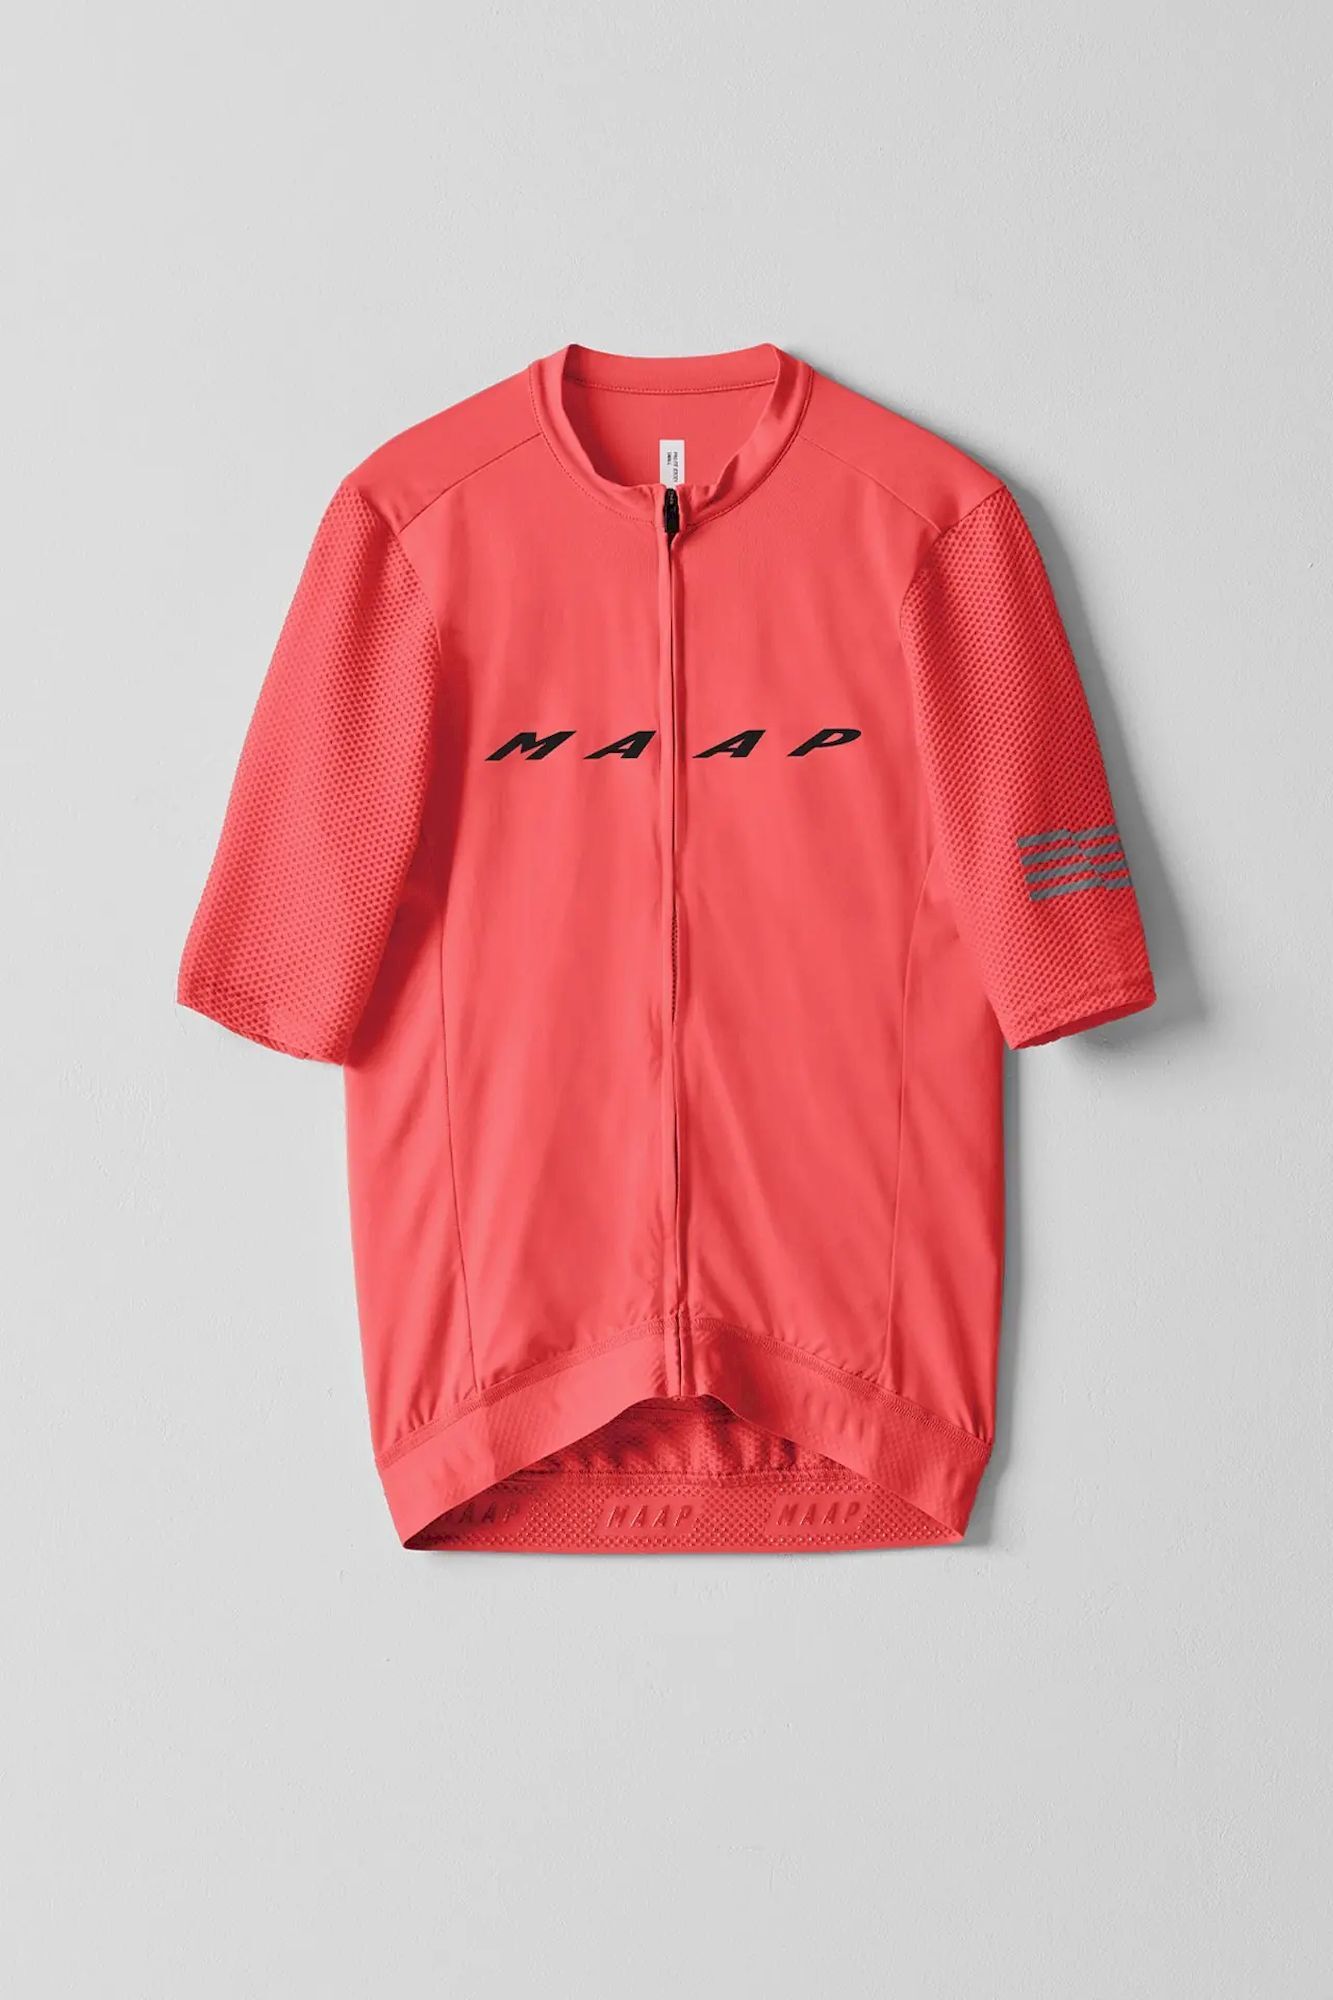 Maap Women's Evade Pro Base Jersey - Maglia ciclismo - Donna | Hardloop